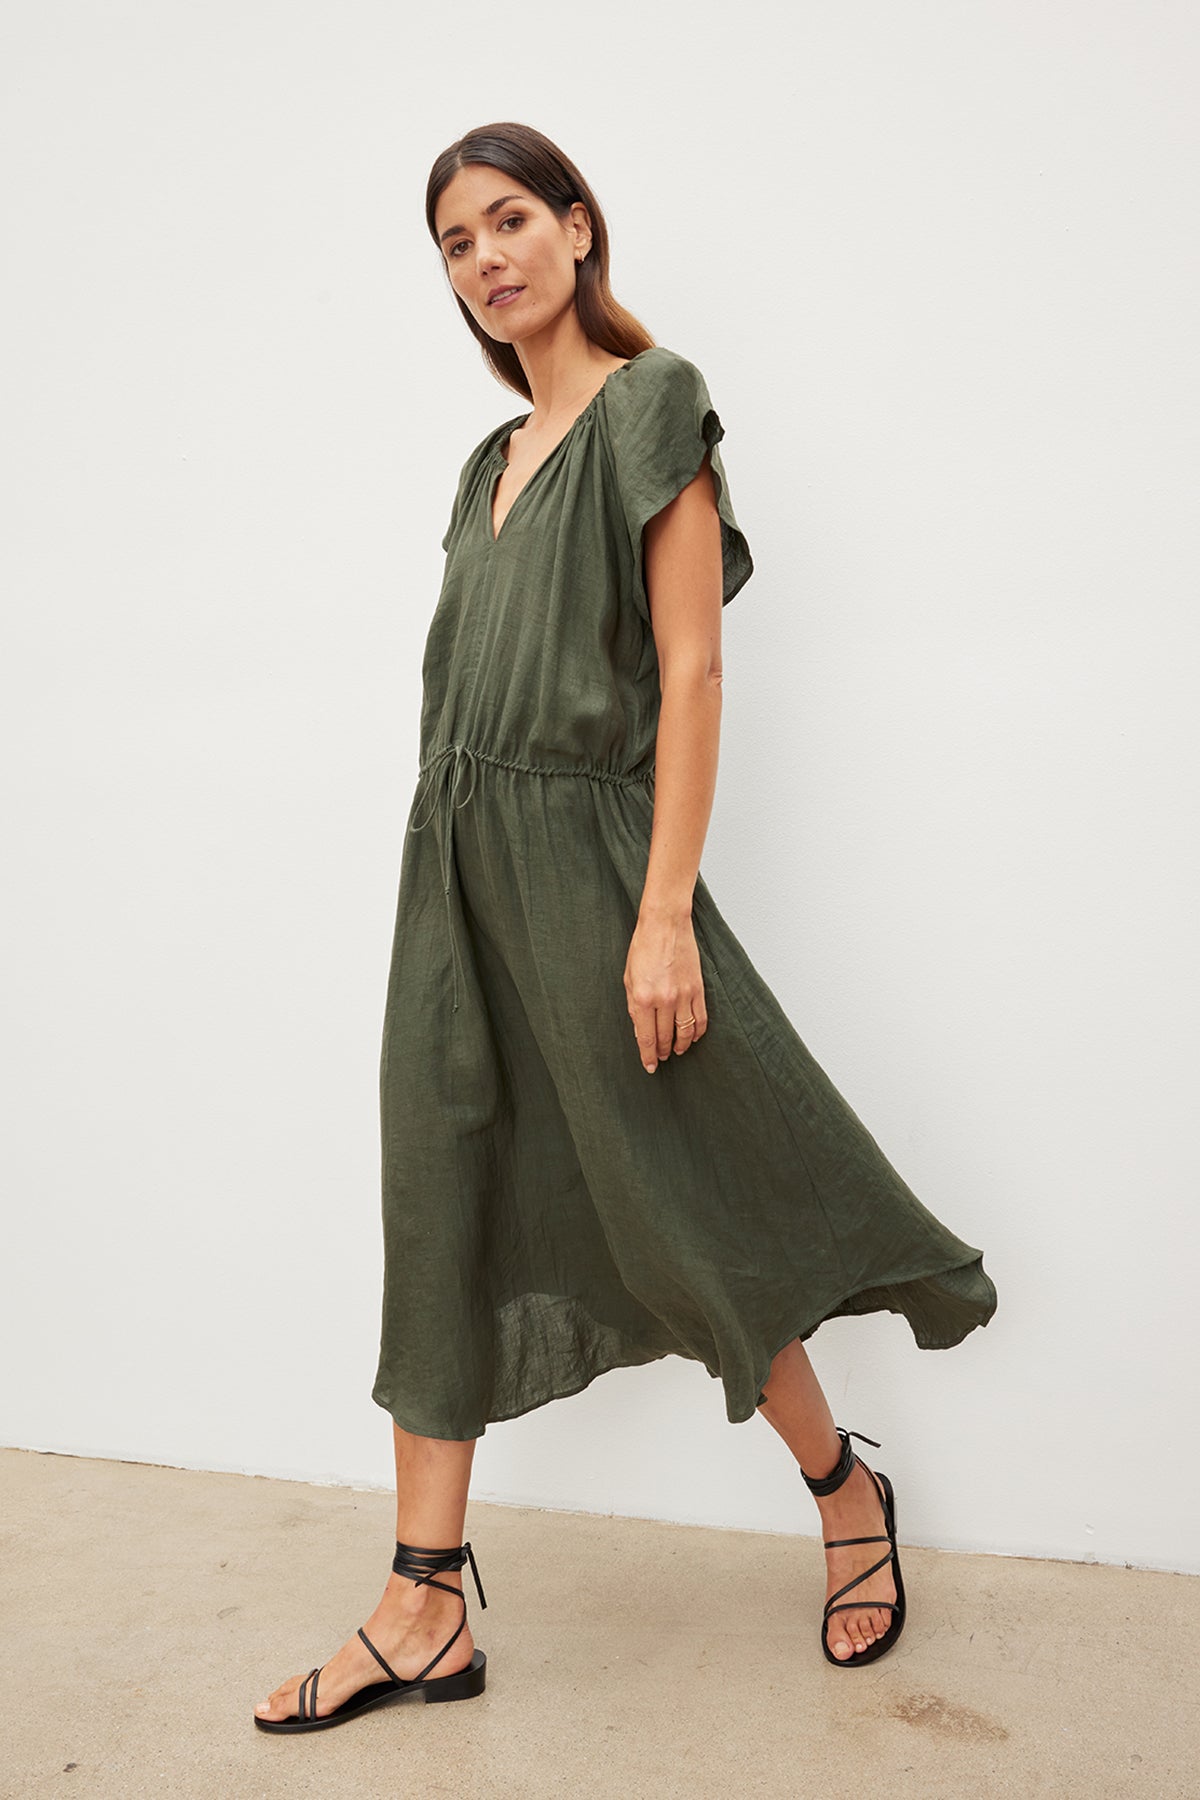 A woman in a PEPPER LINEN V-NECK DRESS by Velvet by Graham & Spencer with a drawstring waist and black sandals posing against a white wall.-35967692210369